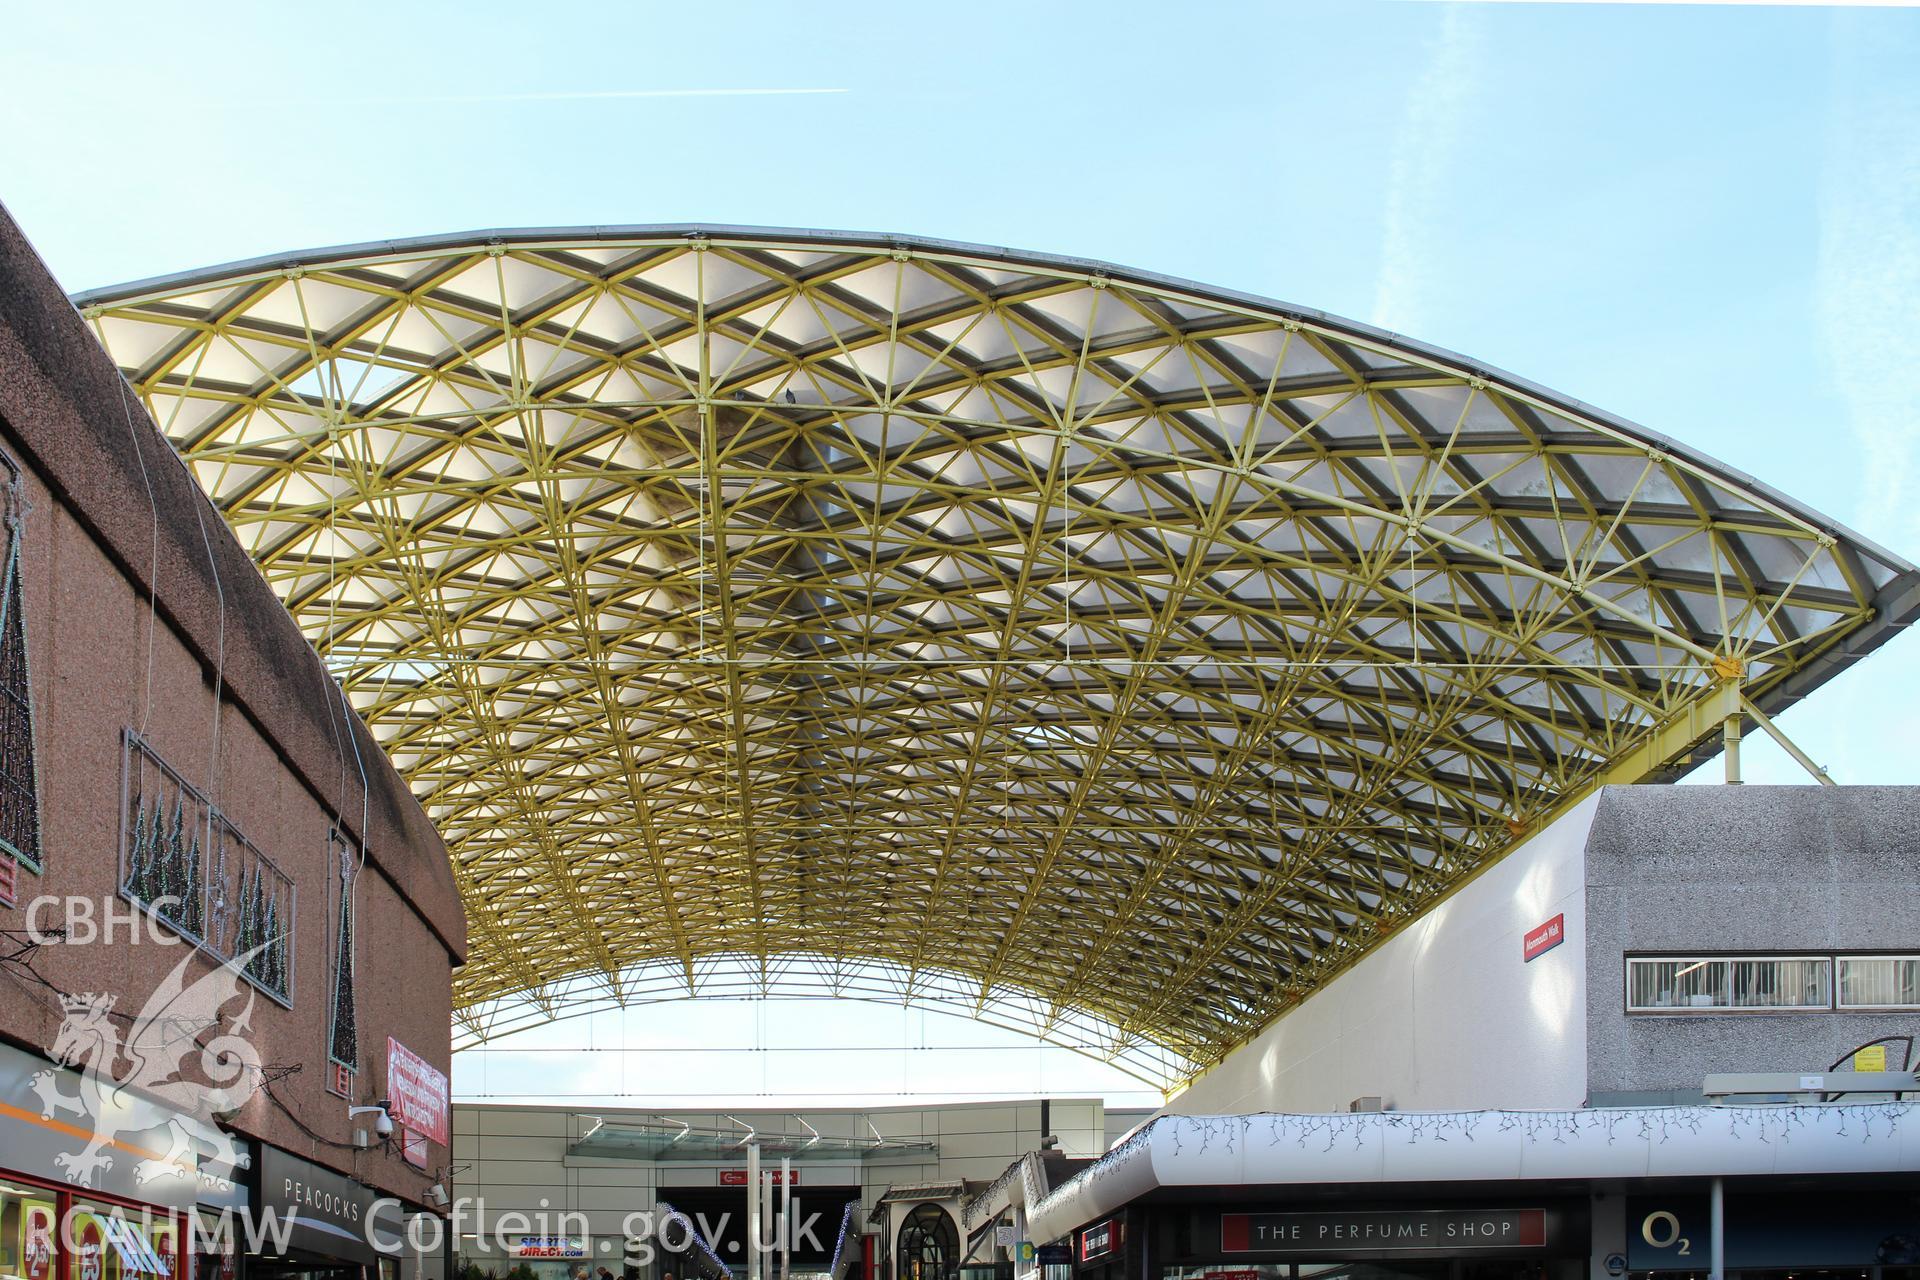 Cwmbran Shopping Centre's canopy. Photograph taken by Sue Fielding in November 2017.